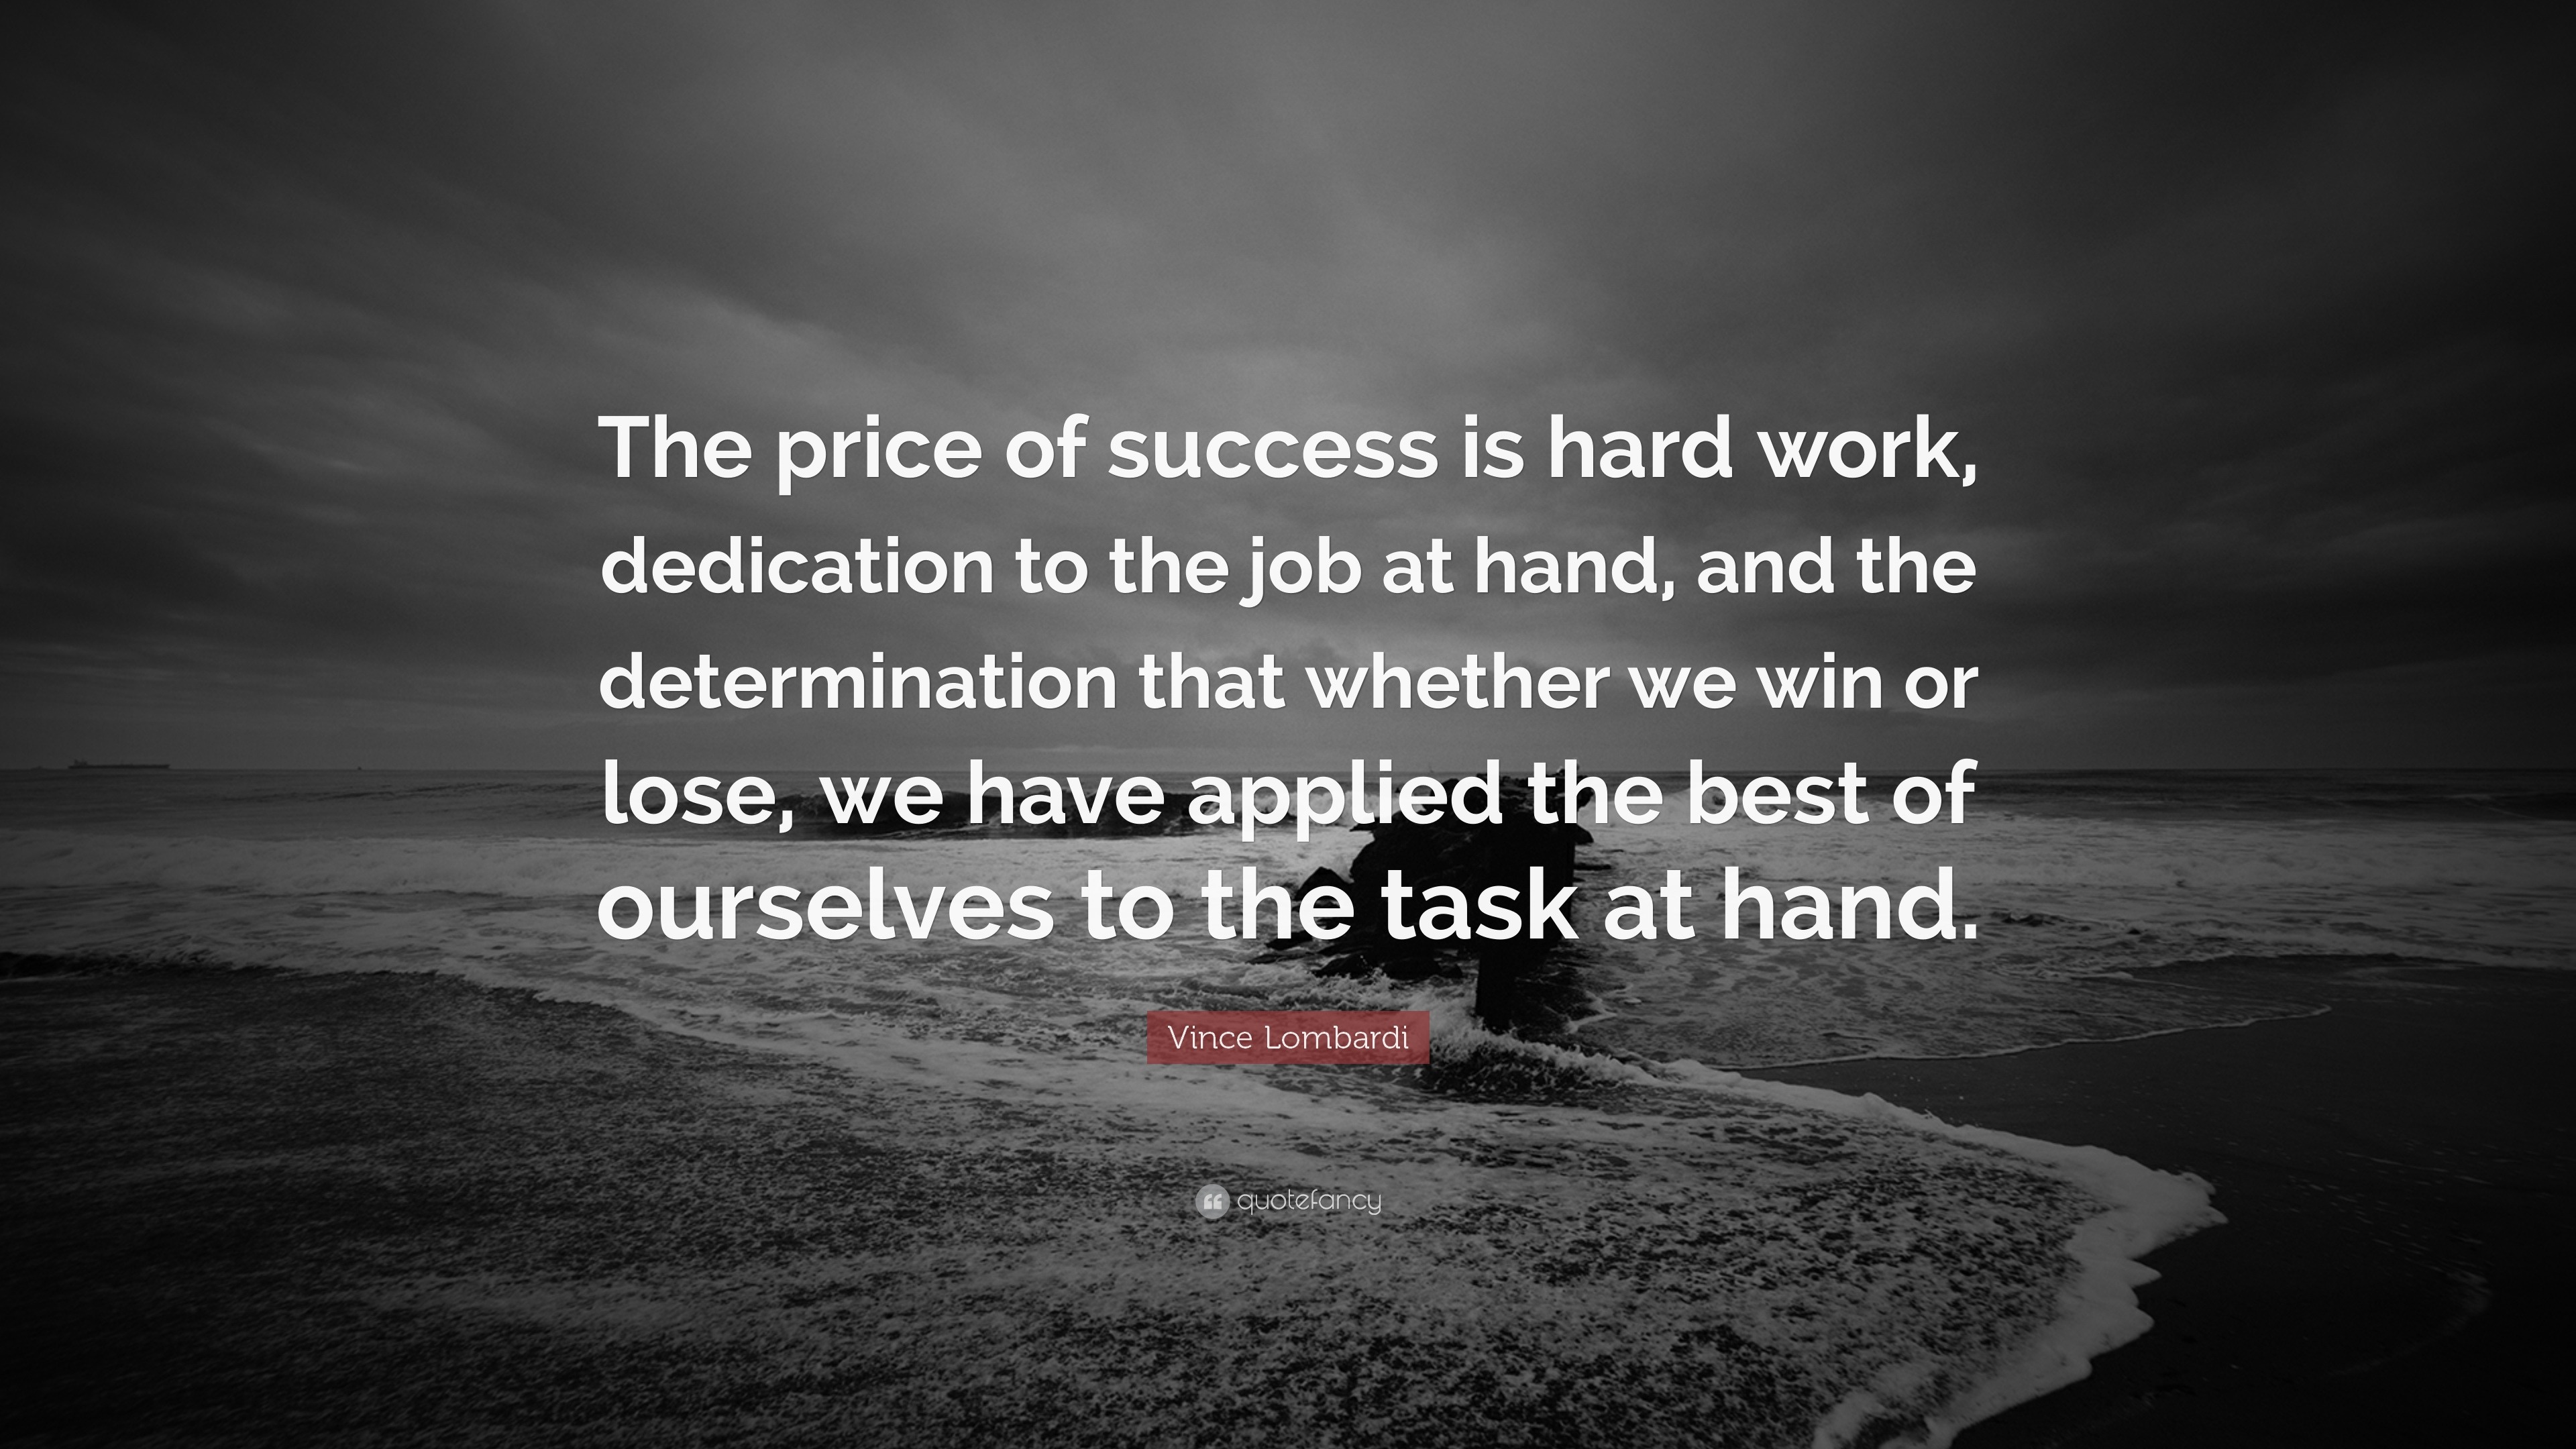 Vince Lombardi Quote: “The price of success is hard work, dedication to